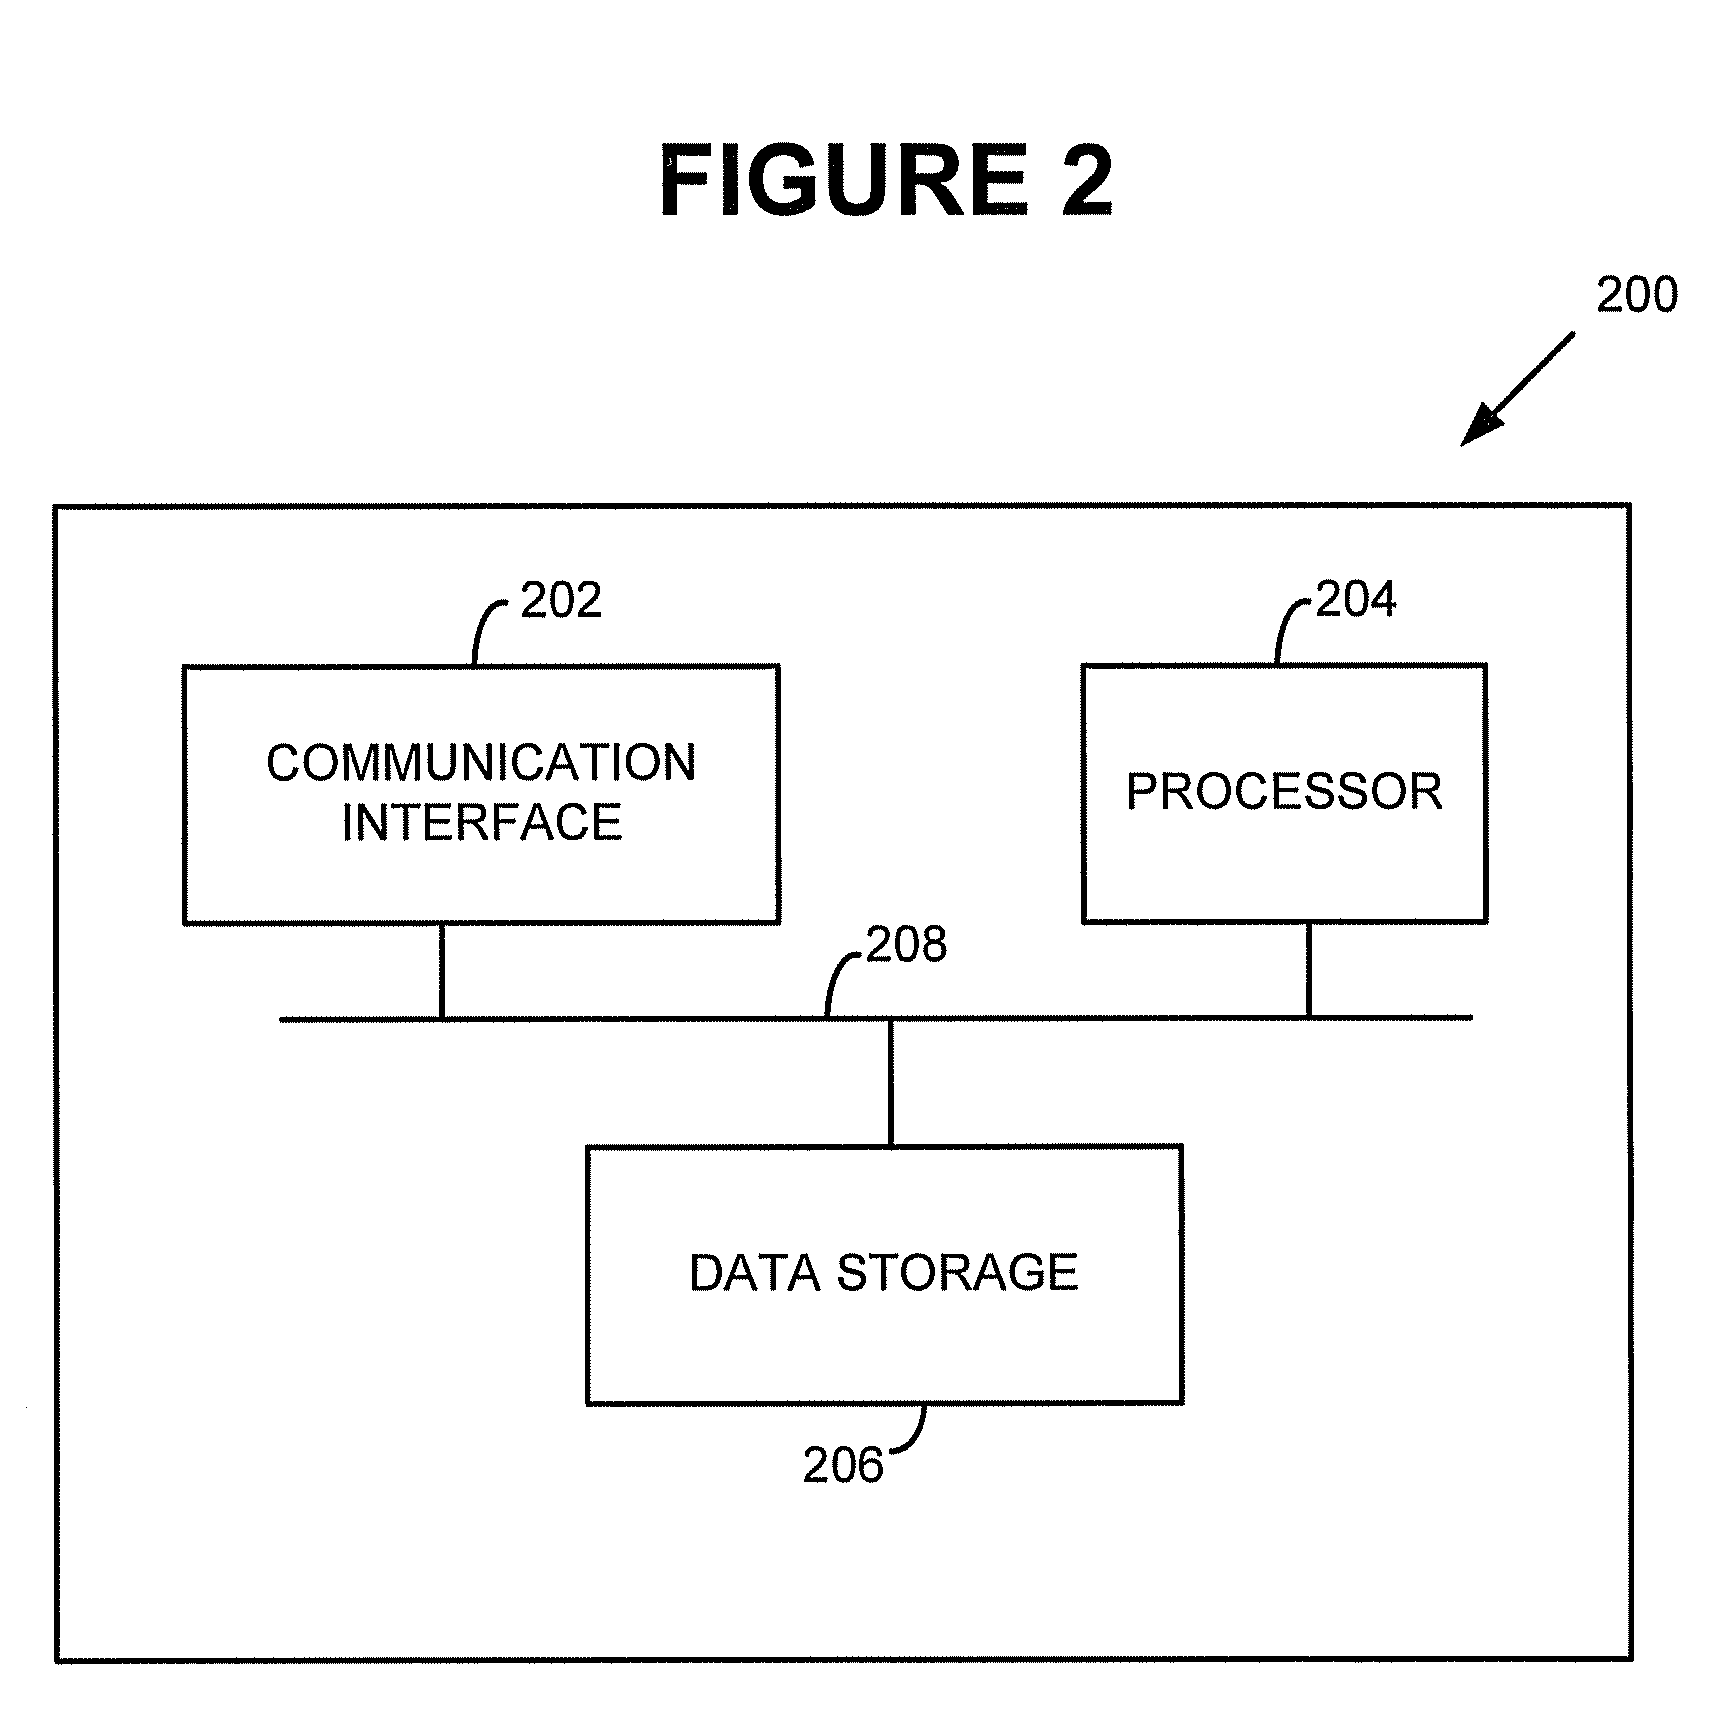 Methods and systems for temporarily modifying a macro-network neighbor list to enable a mobile station to hand off from a macro network to a femto cell